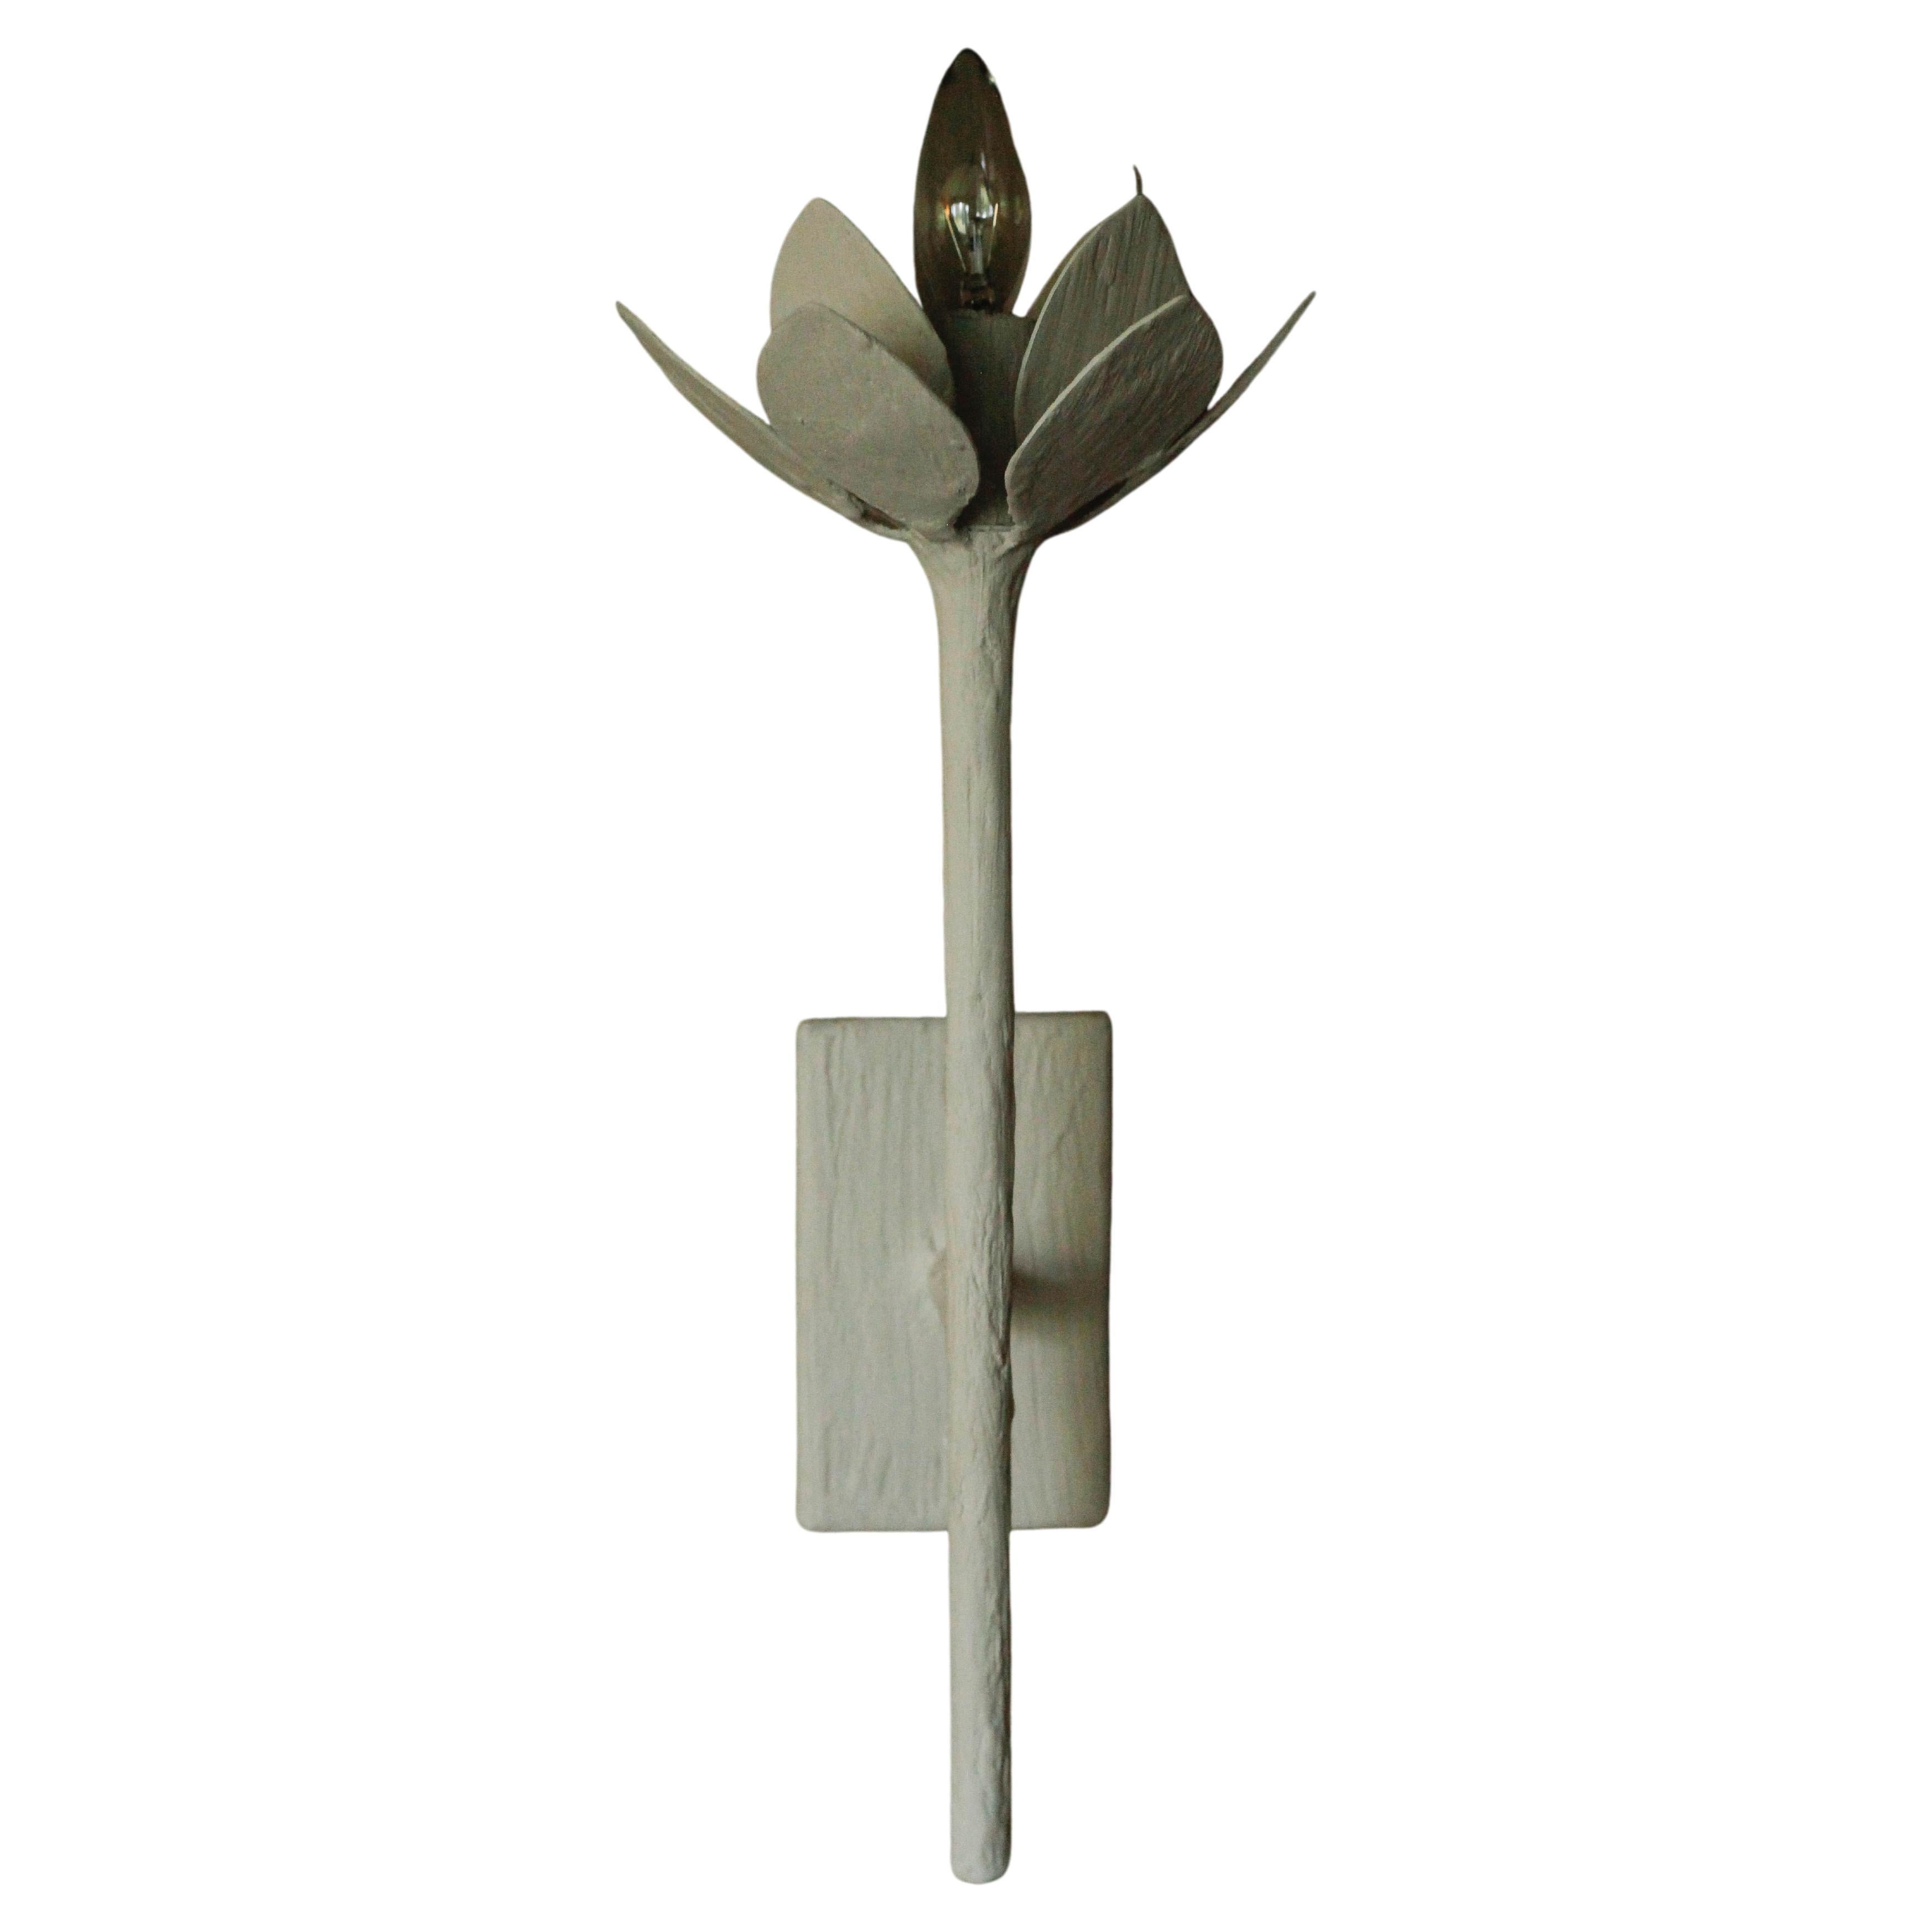 Single elegant lotus flower wall sconce by Tracey Garet of Apsara Interior Design. The fabrication is plaster over steel tubing. The item shown is in white plaster. All Aspara Lighting Designs are custom made. They can be modified to any specific